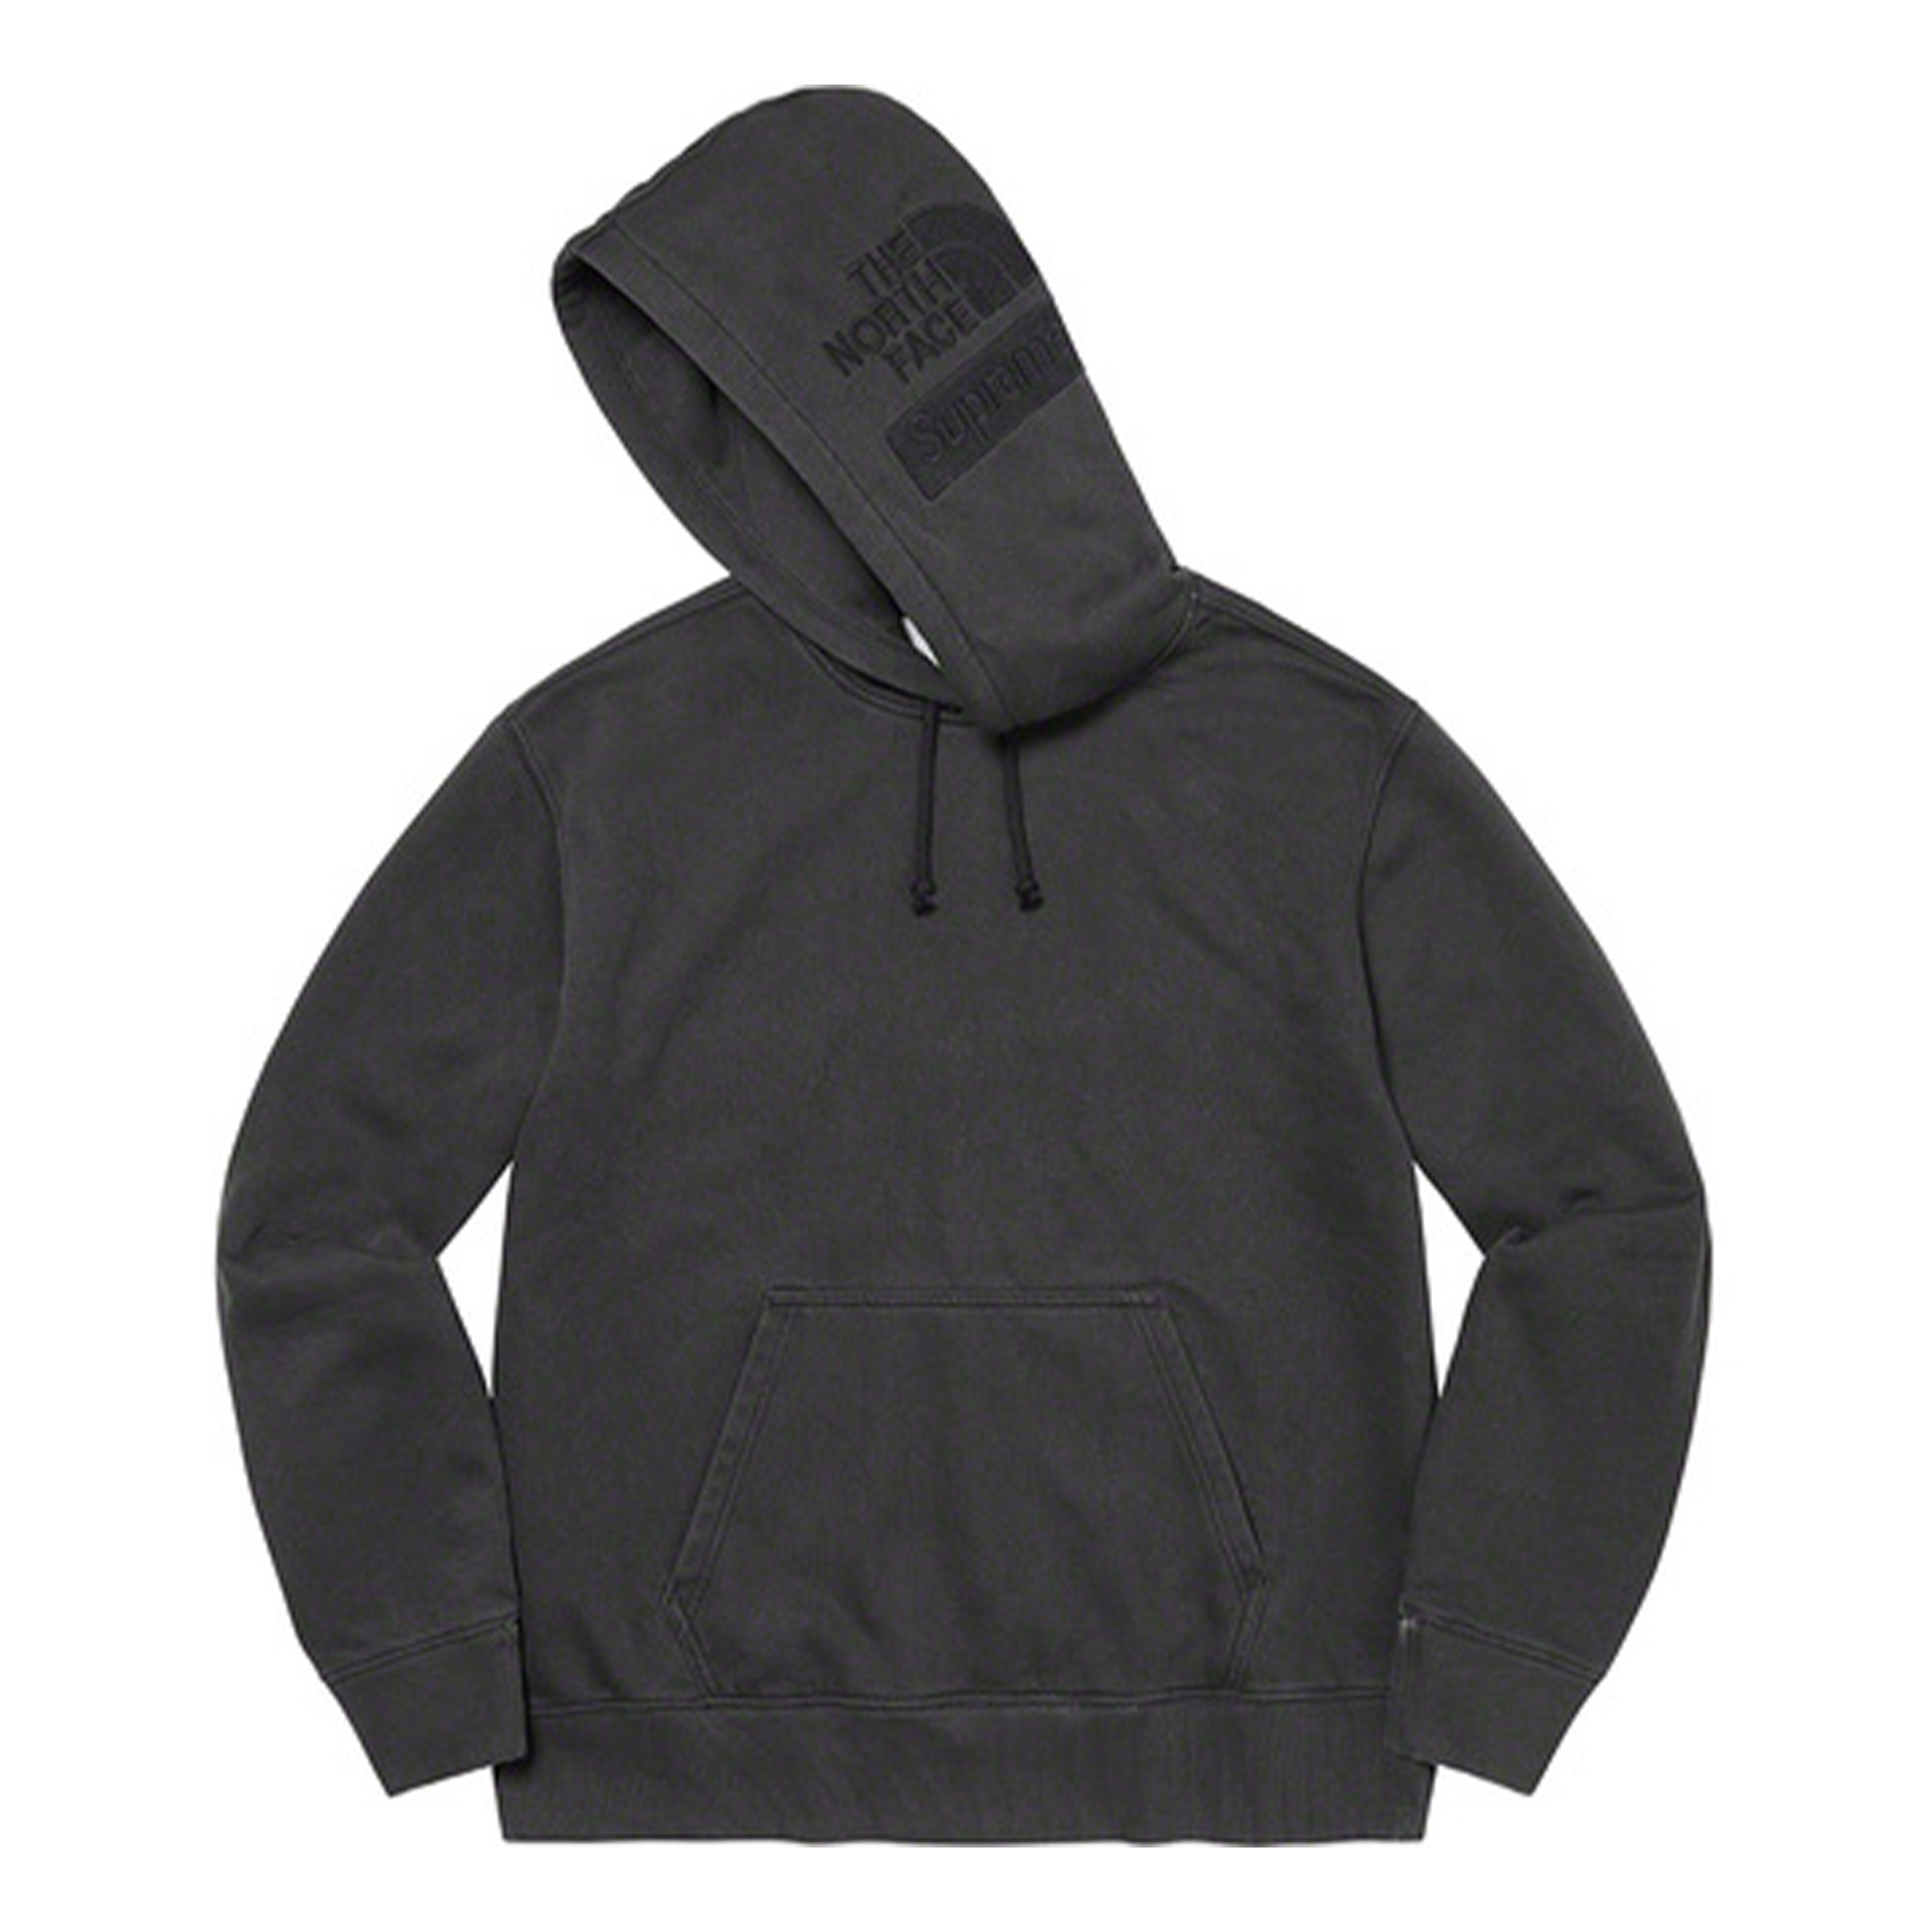 Supreme x The North Face - Hooded Sweatshirt